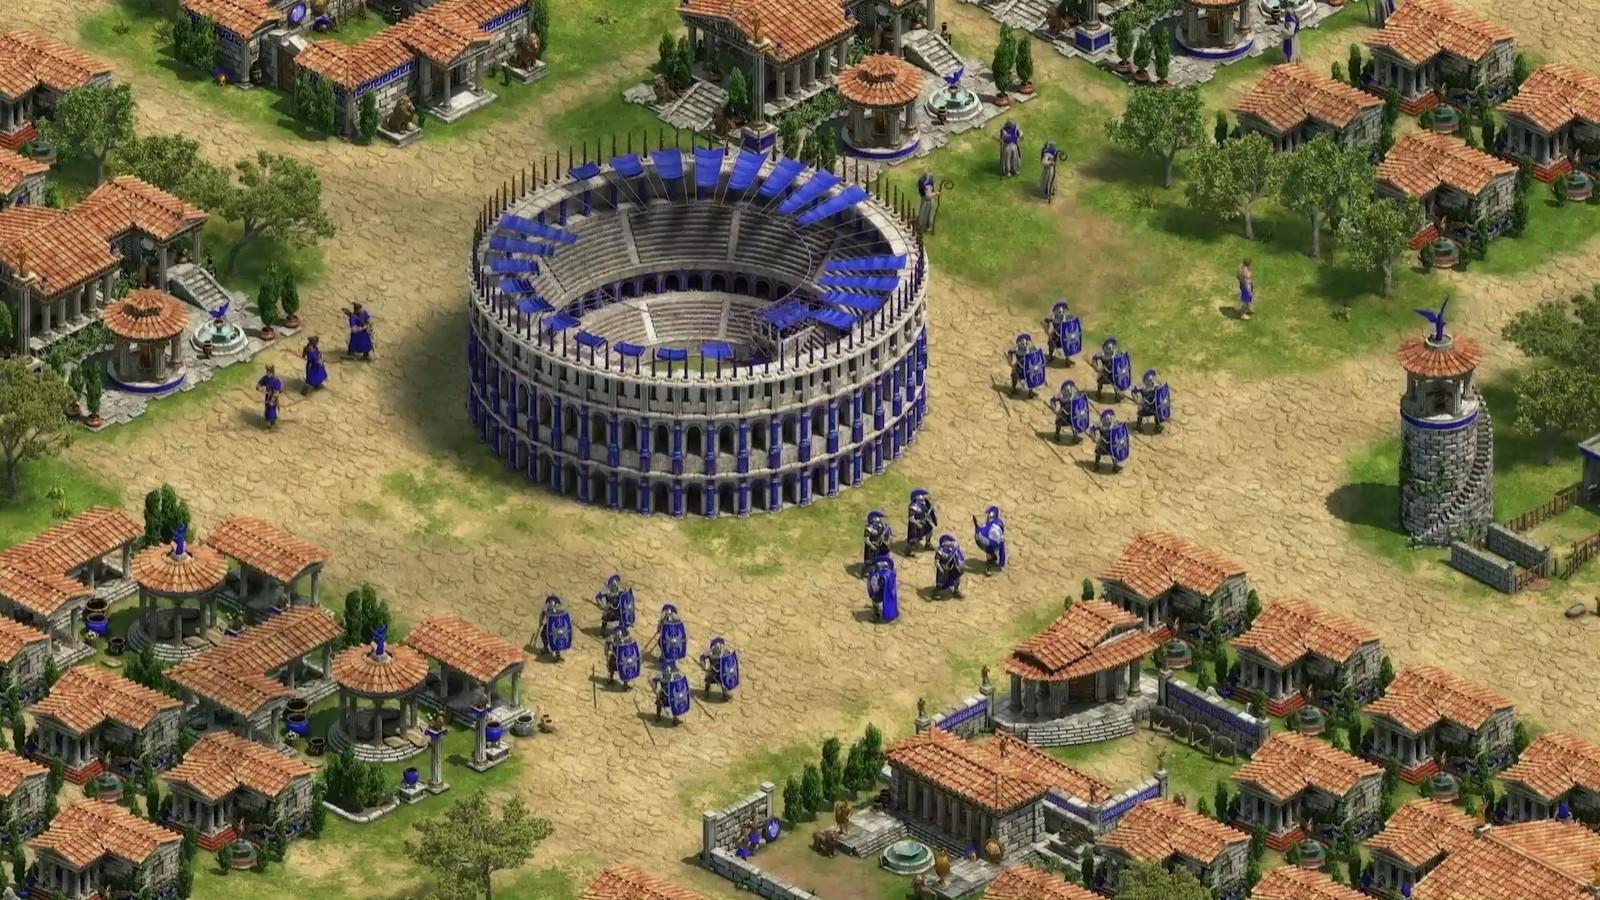 E3 2019: Age of Empires 2 Definitive Edition gets a